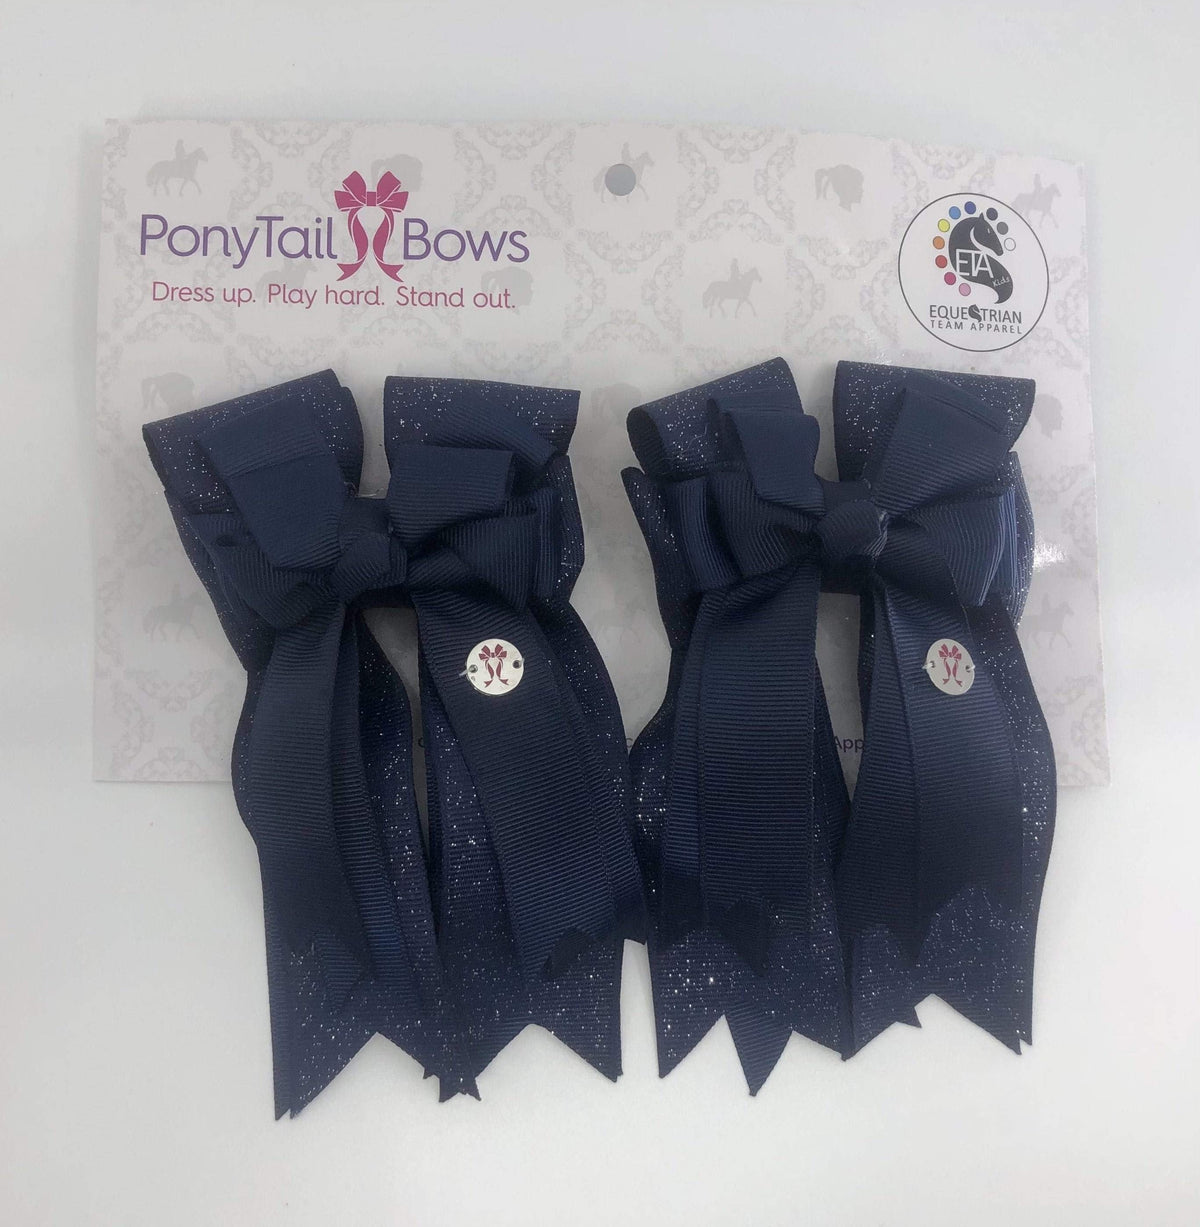 PonyTail Bows 3" Tails Navy PonyTail Bows equestrian team apparel online tack store mobile tack store custom farm apparel custom show stable clothing equestrian lifestyle horse show clothing riding clothes Abbie Horse Show Bows | PonyTail Bows | Equestrian Hair Accessories horses equestrian tack store